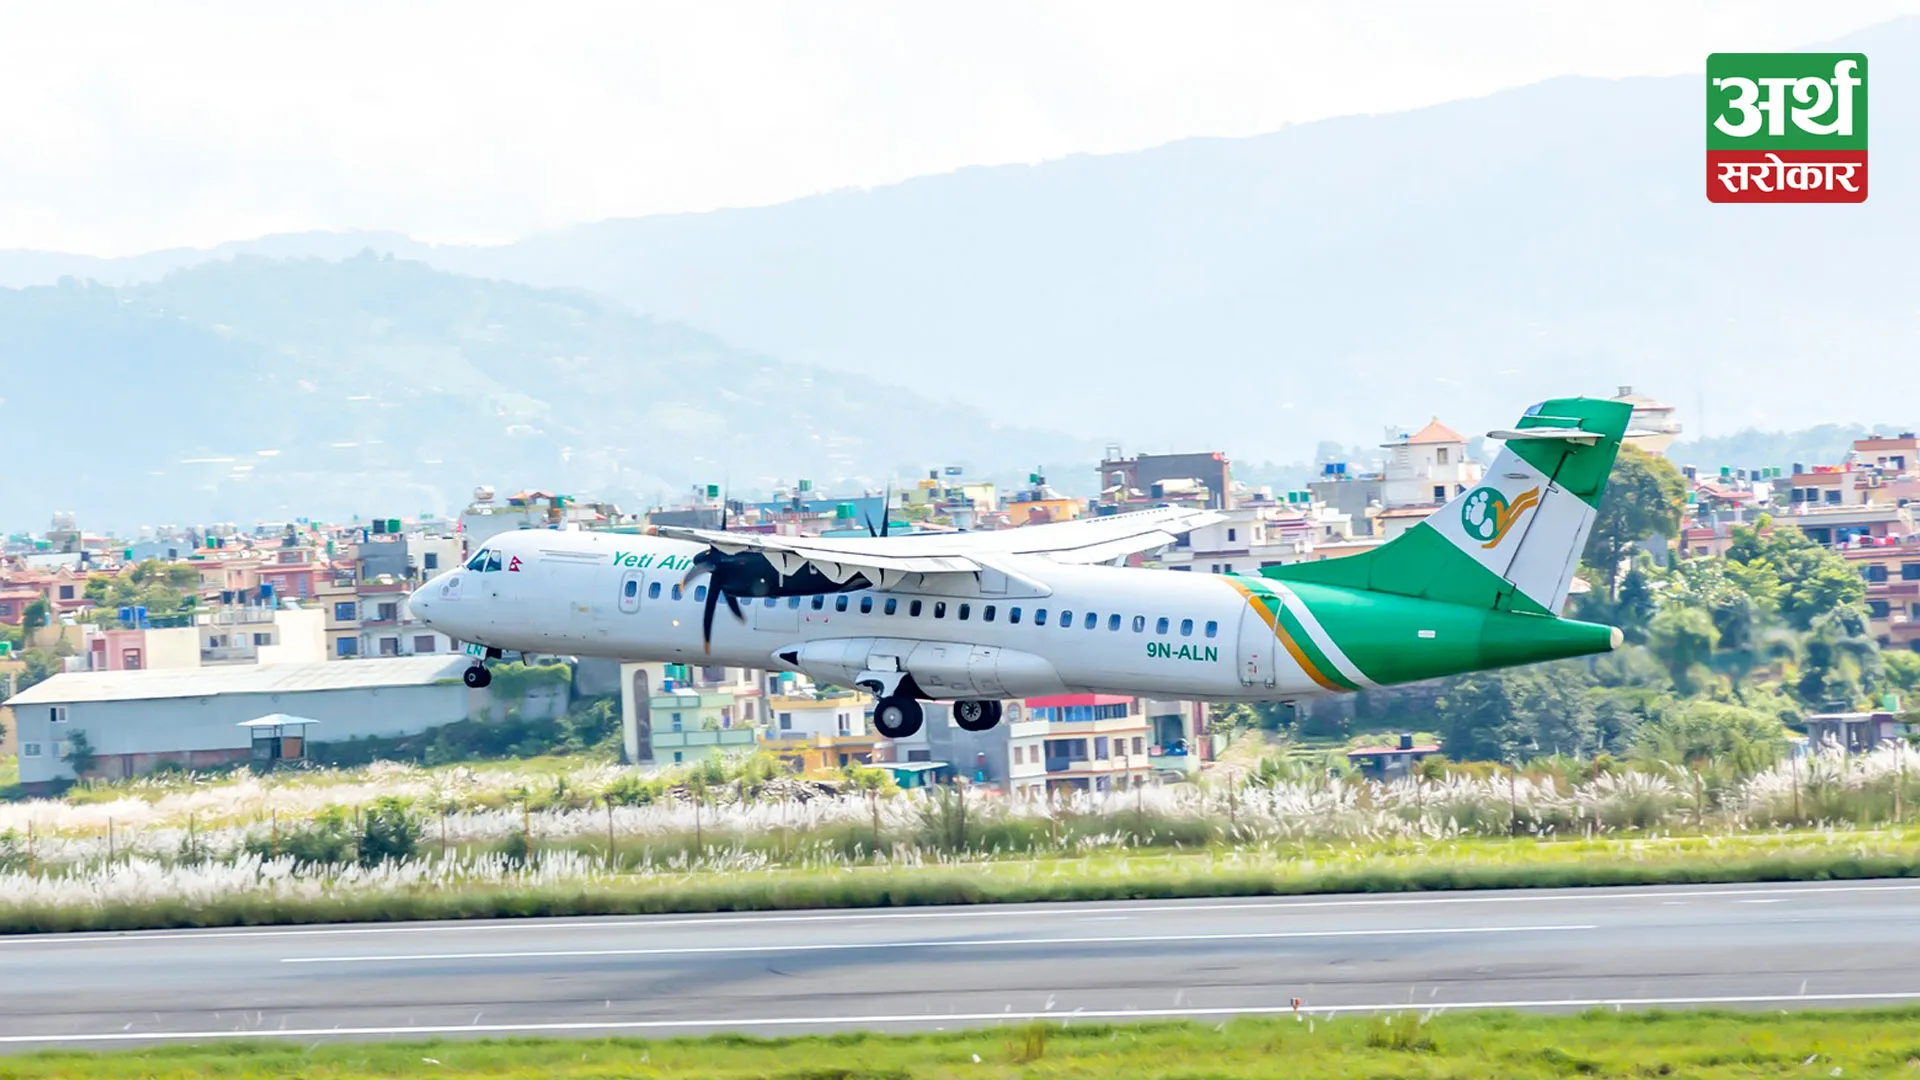 Yeti Airlines Partners with Birat Cancer Institute to Provide Free Air Tickets for Cancer Patients